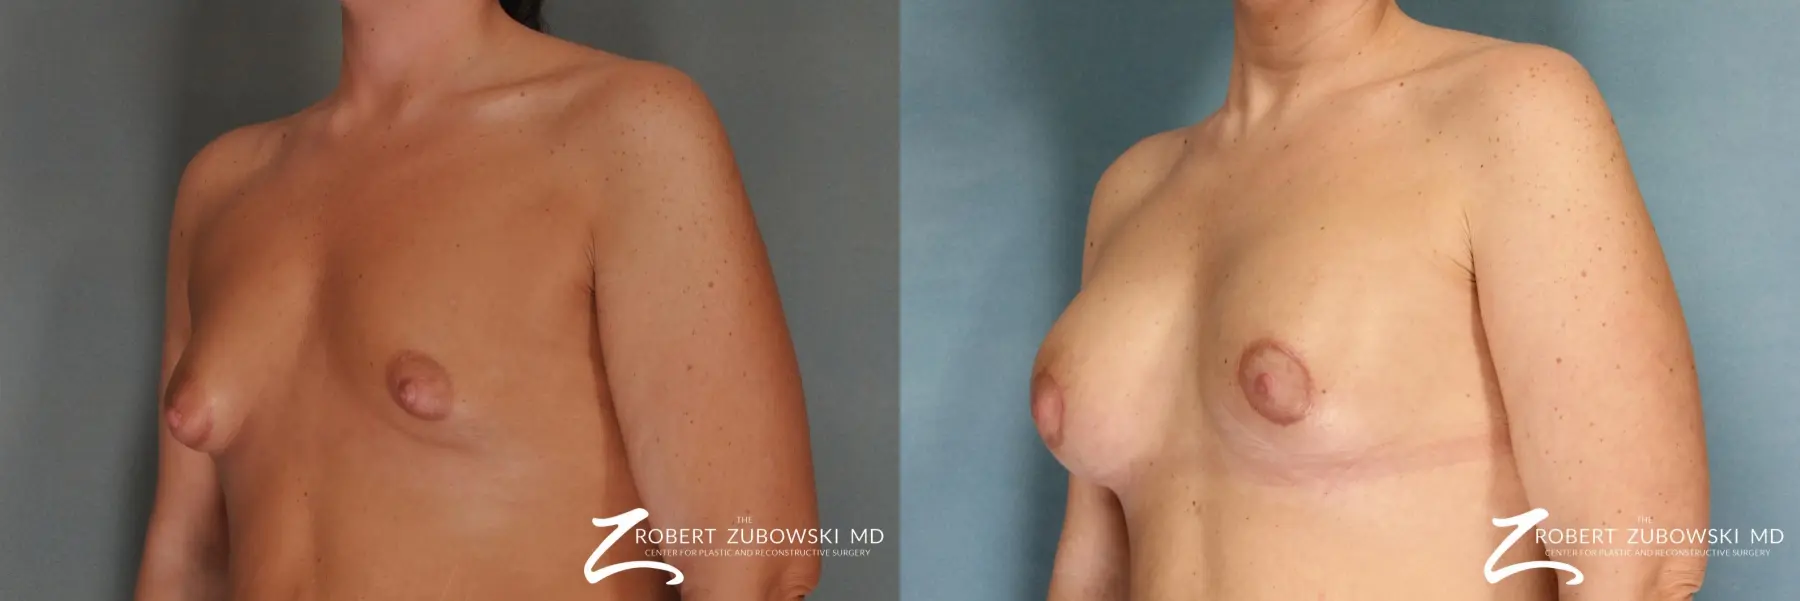 Breast Lift And Augmentation: Patient 12 - Before and After 2